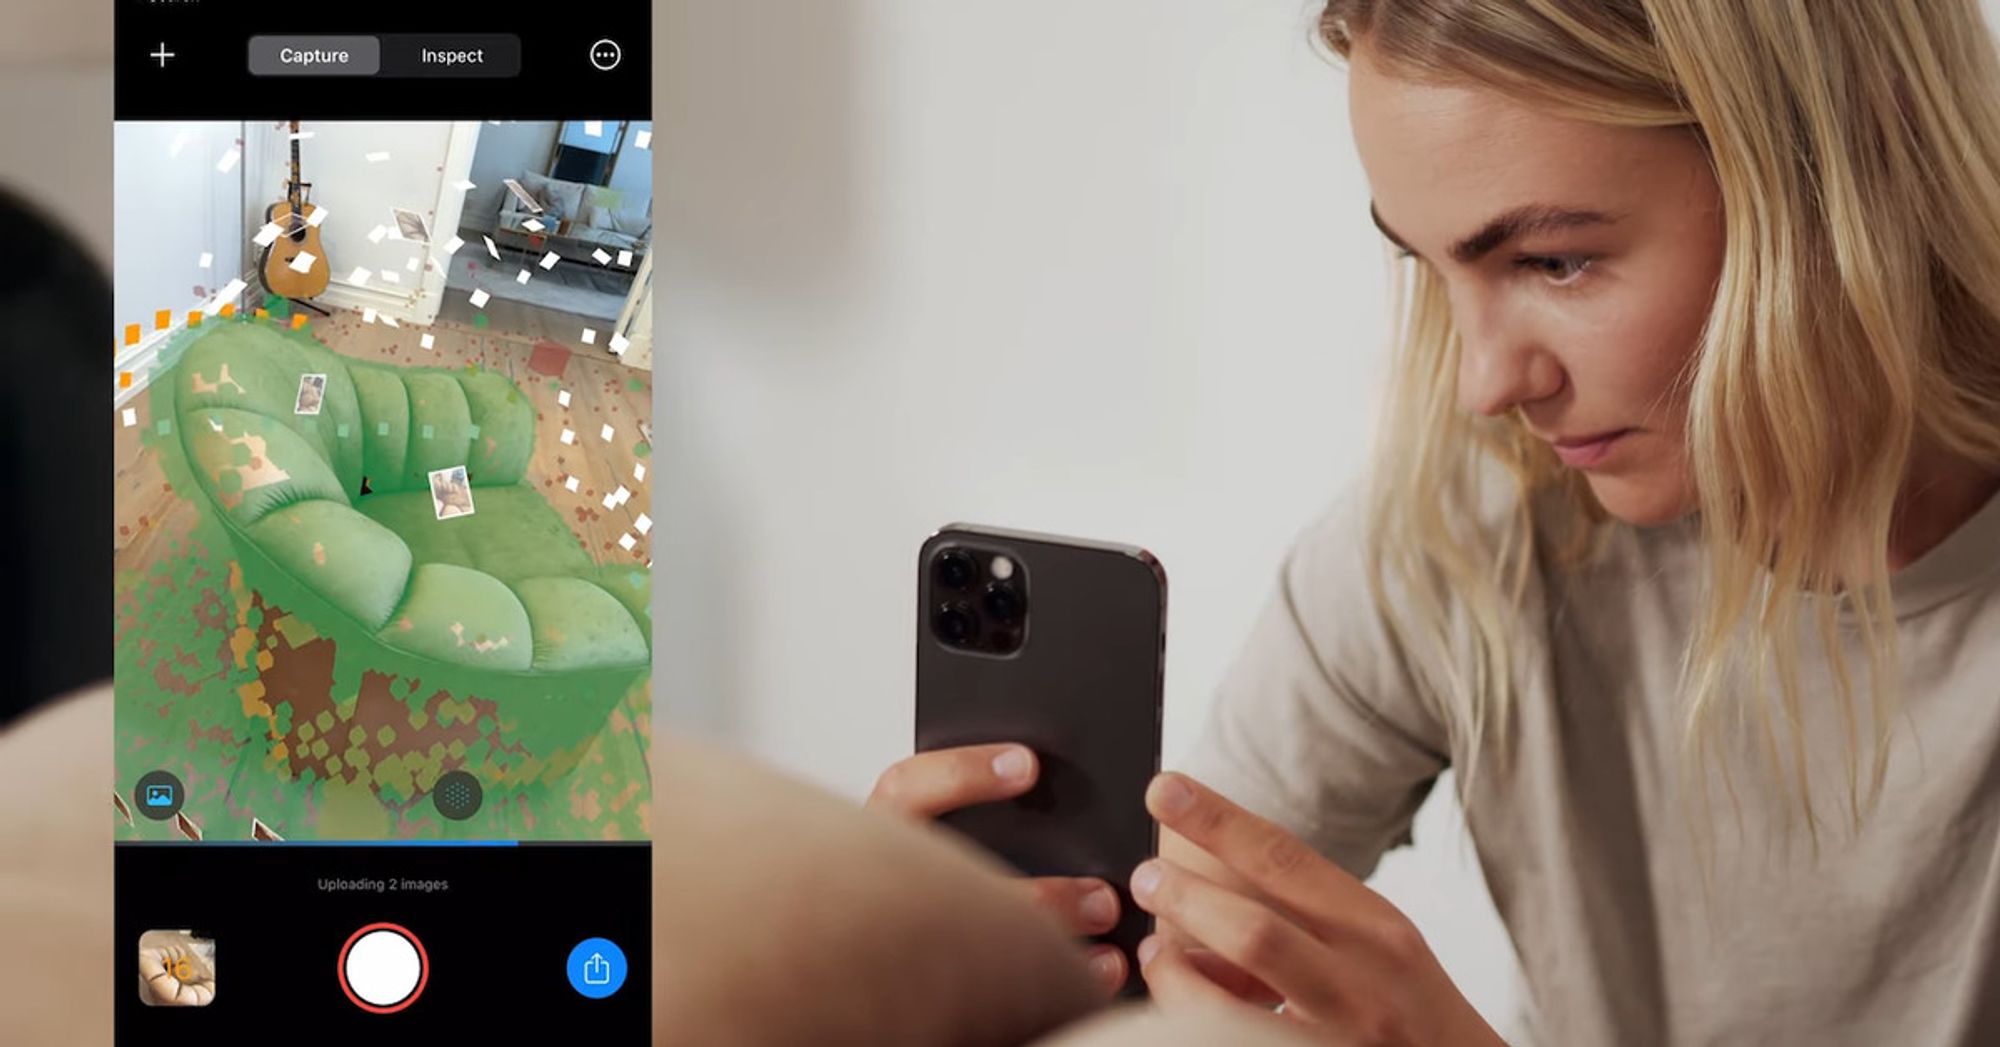 Epic's new RealityScan app can make 3D models from smartphone photos